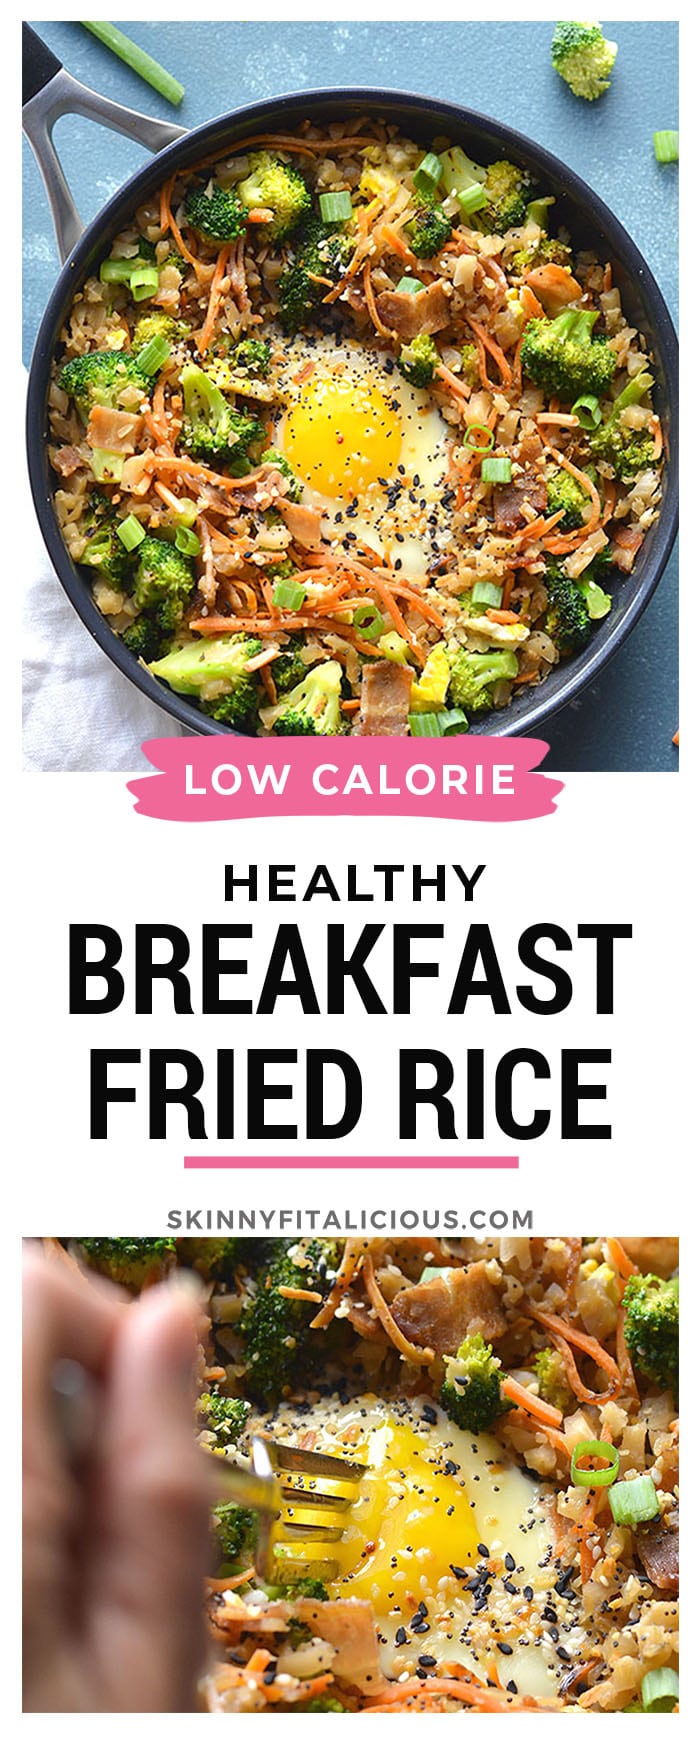 Low Carb Breakfast Cauliflower Fried Rice is an easy breakfast meal prep perfect for a healthy breakfast. Freezer friendly, easy to make and delicious!